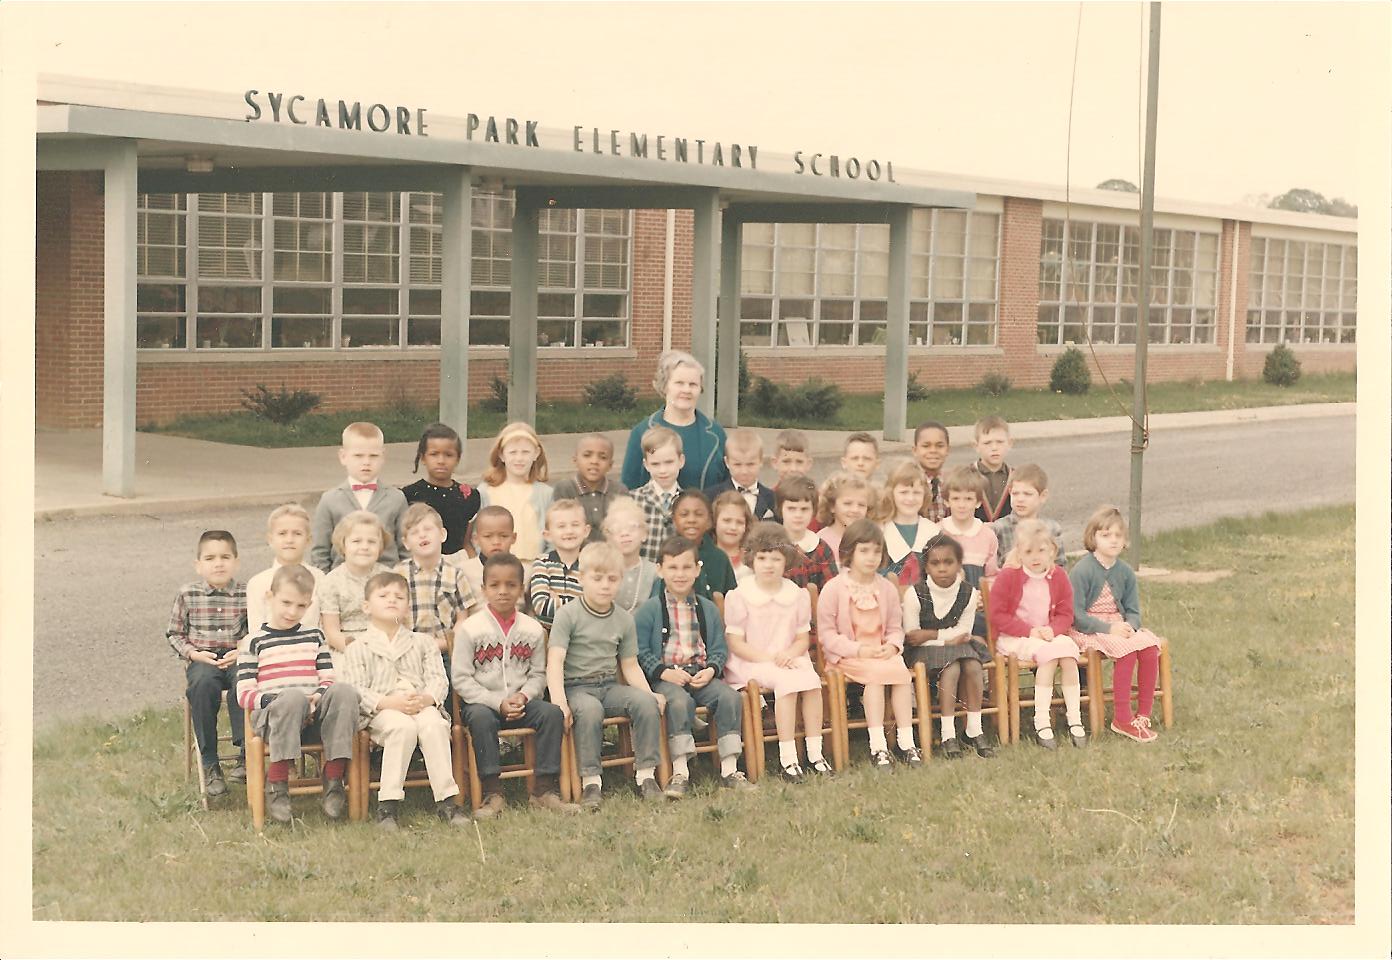 Sycamore Park Elementary School 1966 (photo courtesty of Kathy Dwyer)